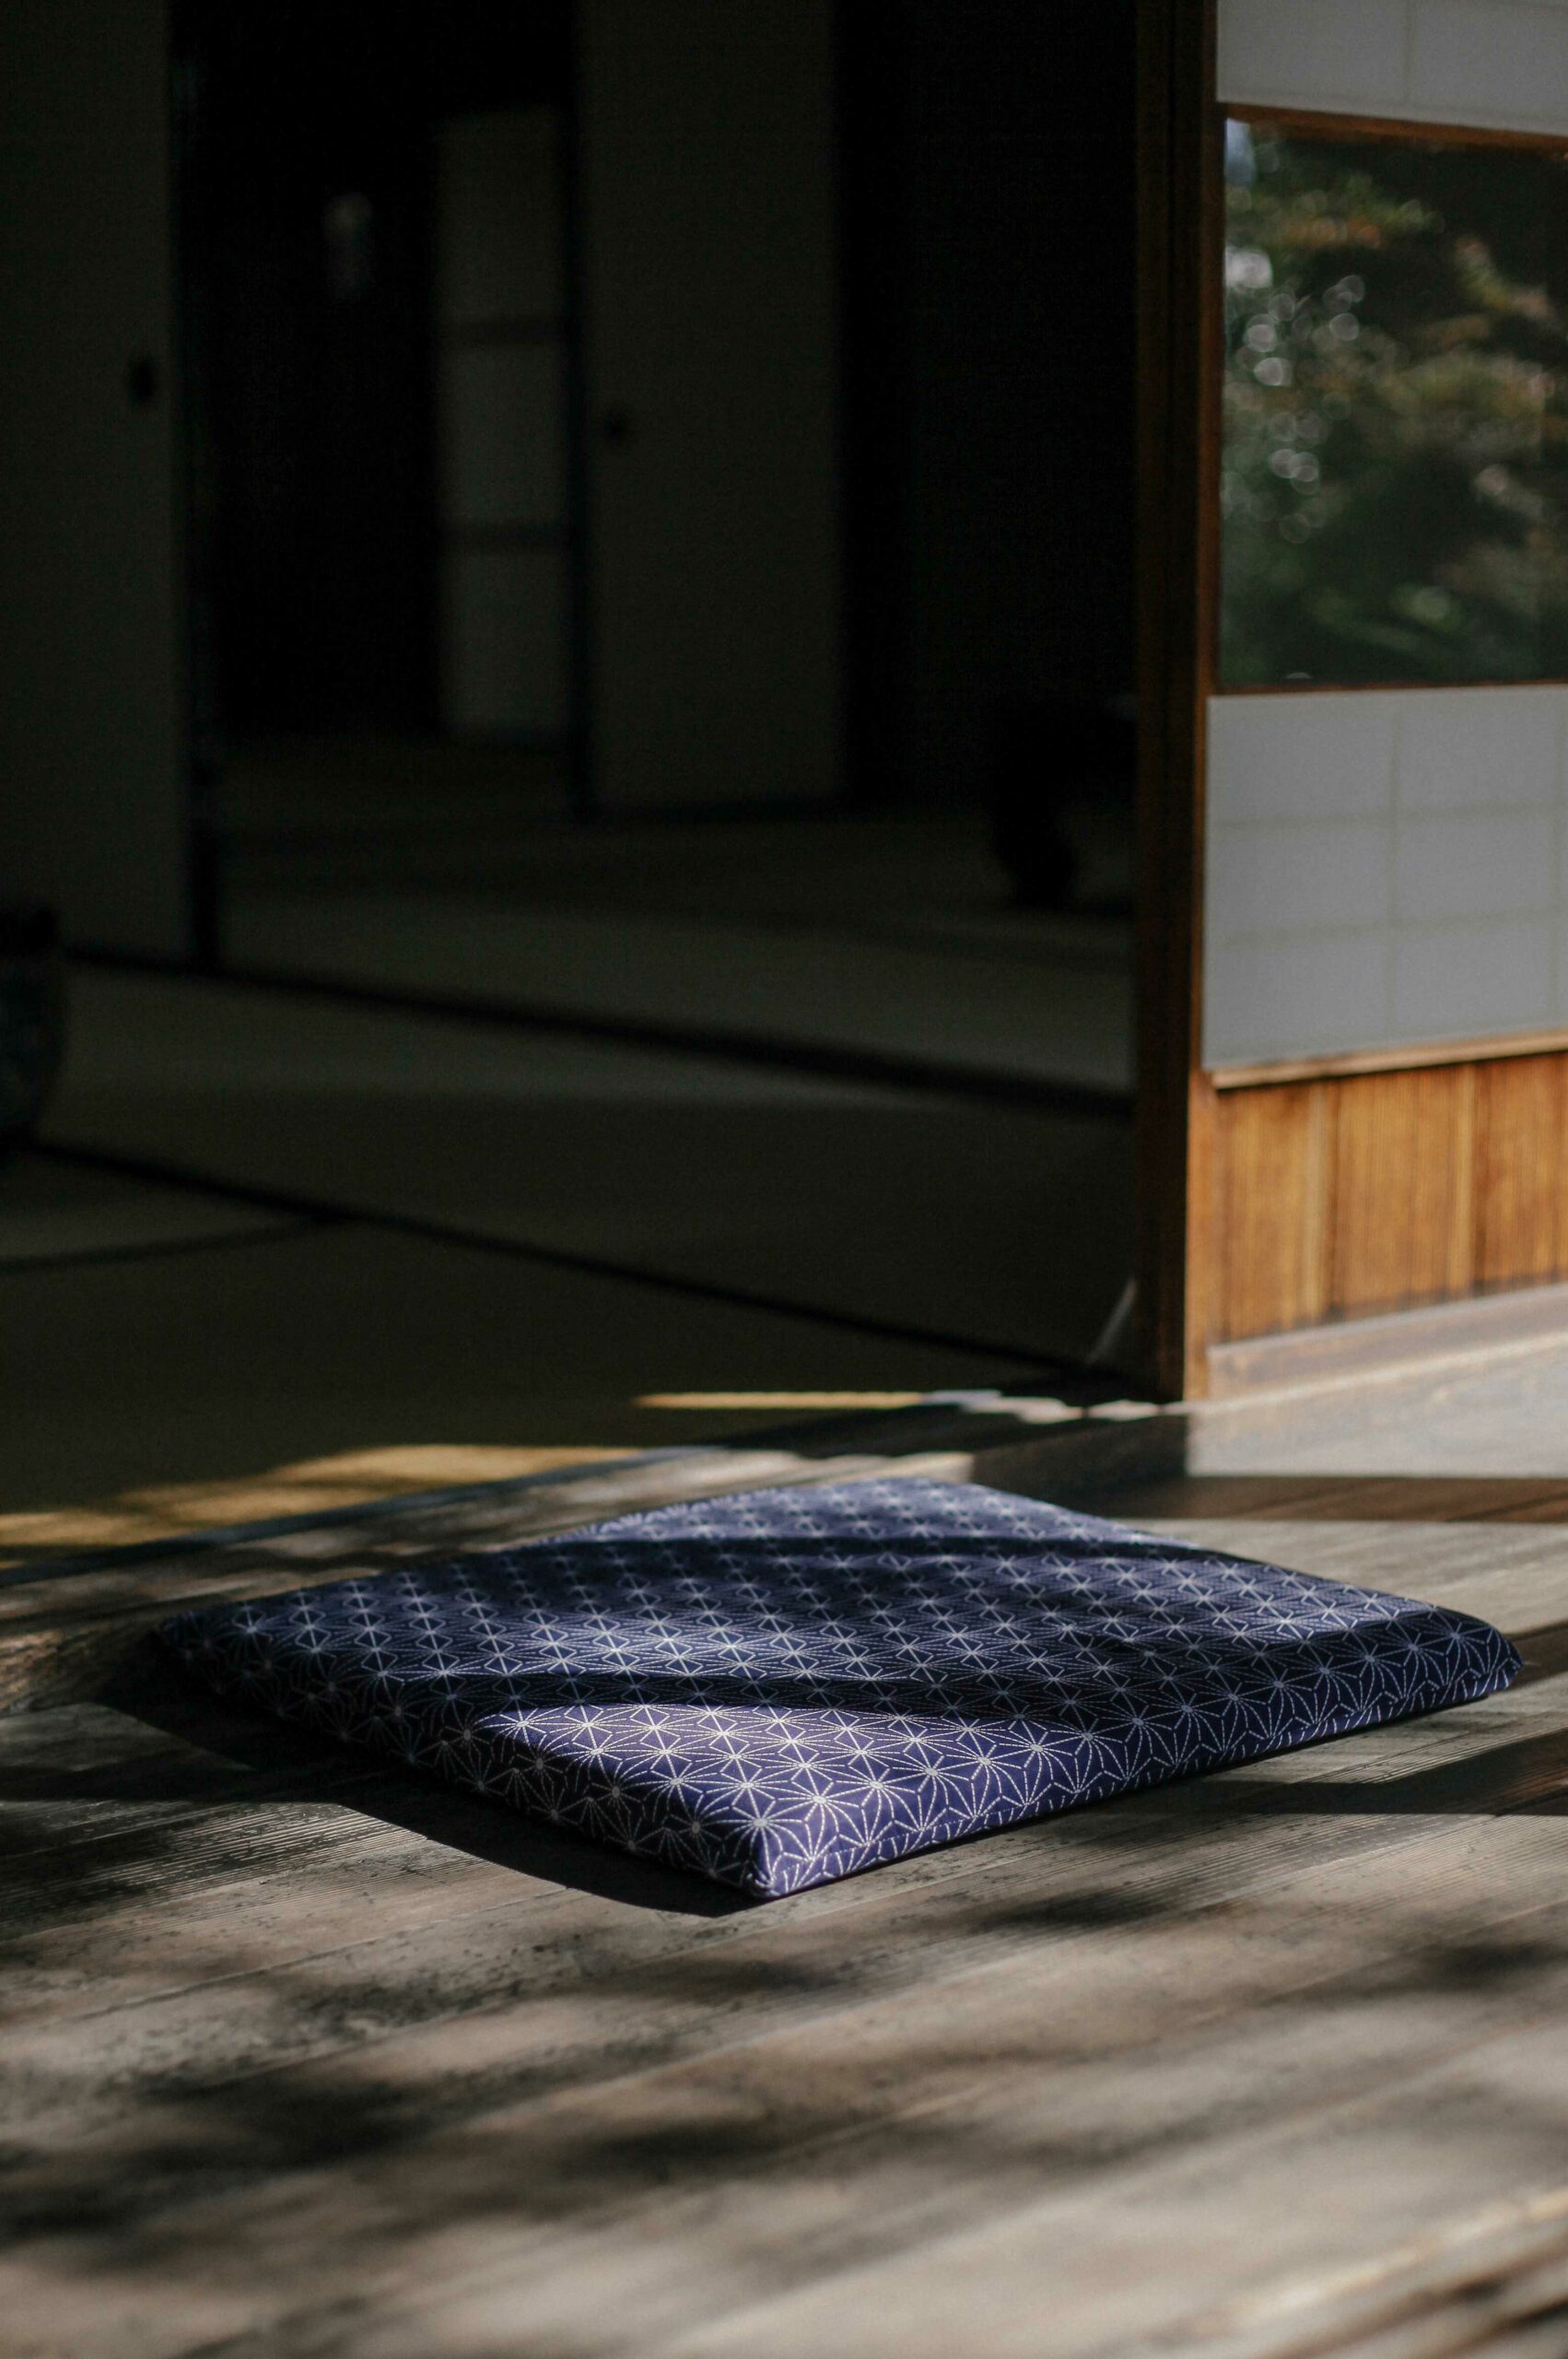 A simple cushion is positioned on the veranda at Sо̄seki Natsume's House.